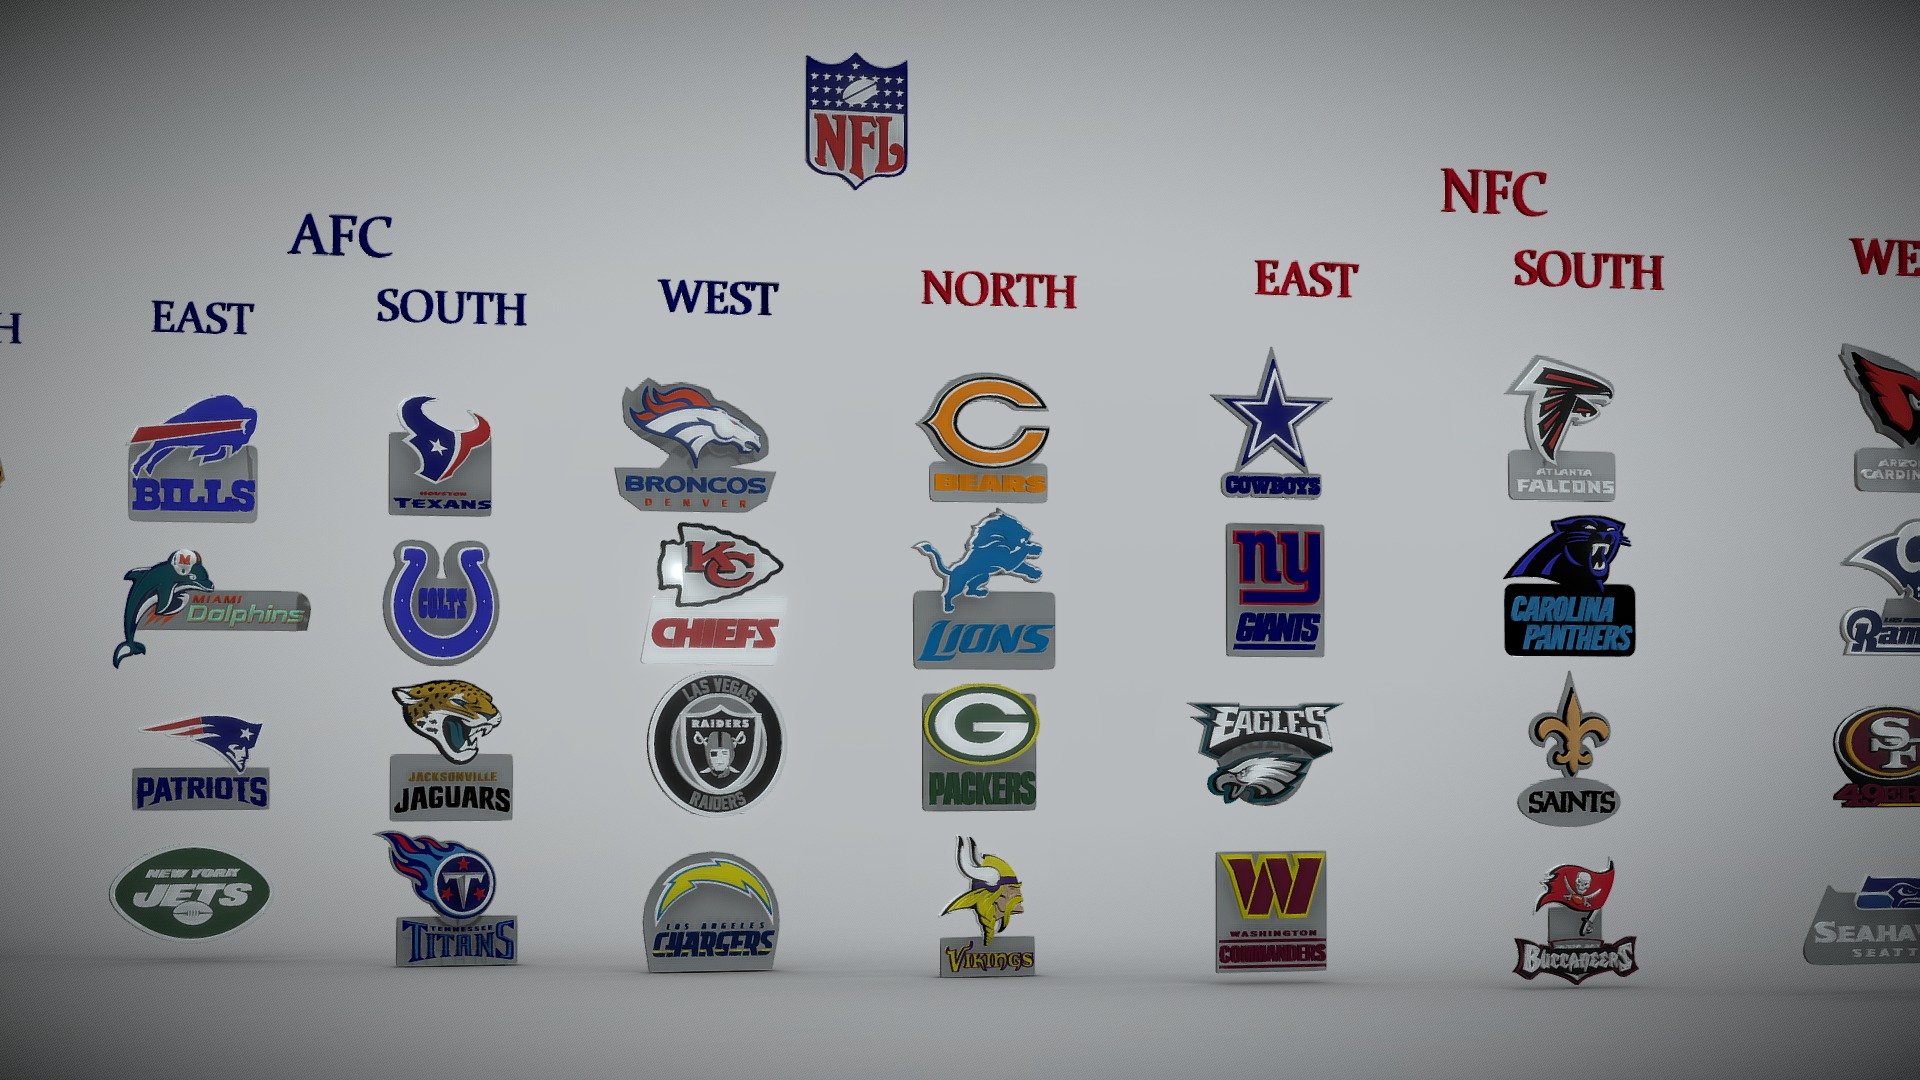 National Football League (NFL) all Logos for printing and rendering

American football league all Logos 
Printable and renderable logos

Ready to print
Ready to render
Videogame Real Time ready

10cms tall each one approx

Merged and color-splitted models

Format: FBX vertex color and STL full and splitted versions

Ilustrator vector included

If you have any questions do not hesitate to write me, I will be happy to answer! - NFL ALL LOGOS Printable an Renderable - Buy Royalty Free 3D model by generalista3D (@adelin) 3d model